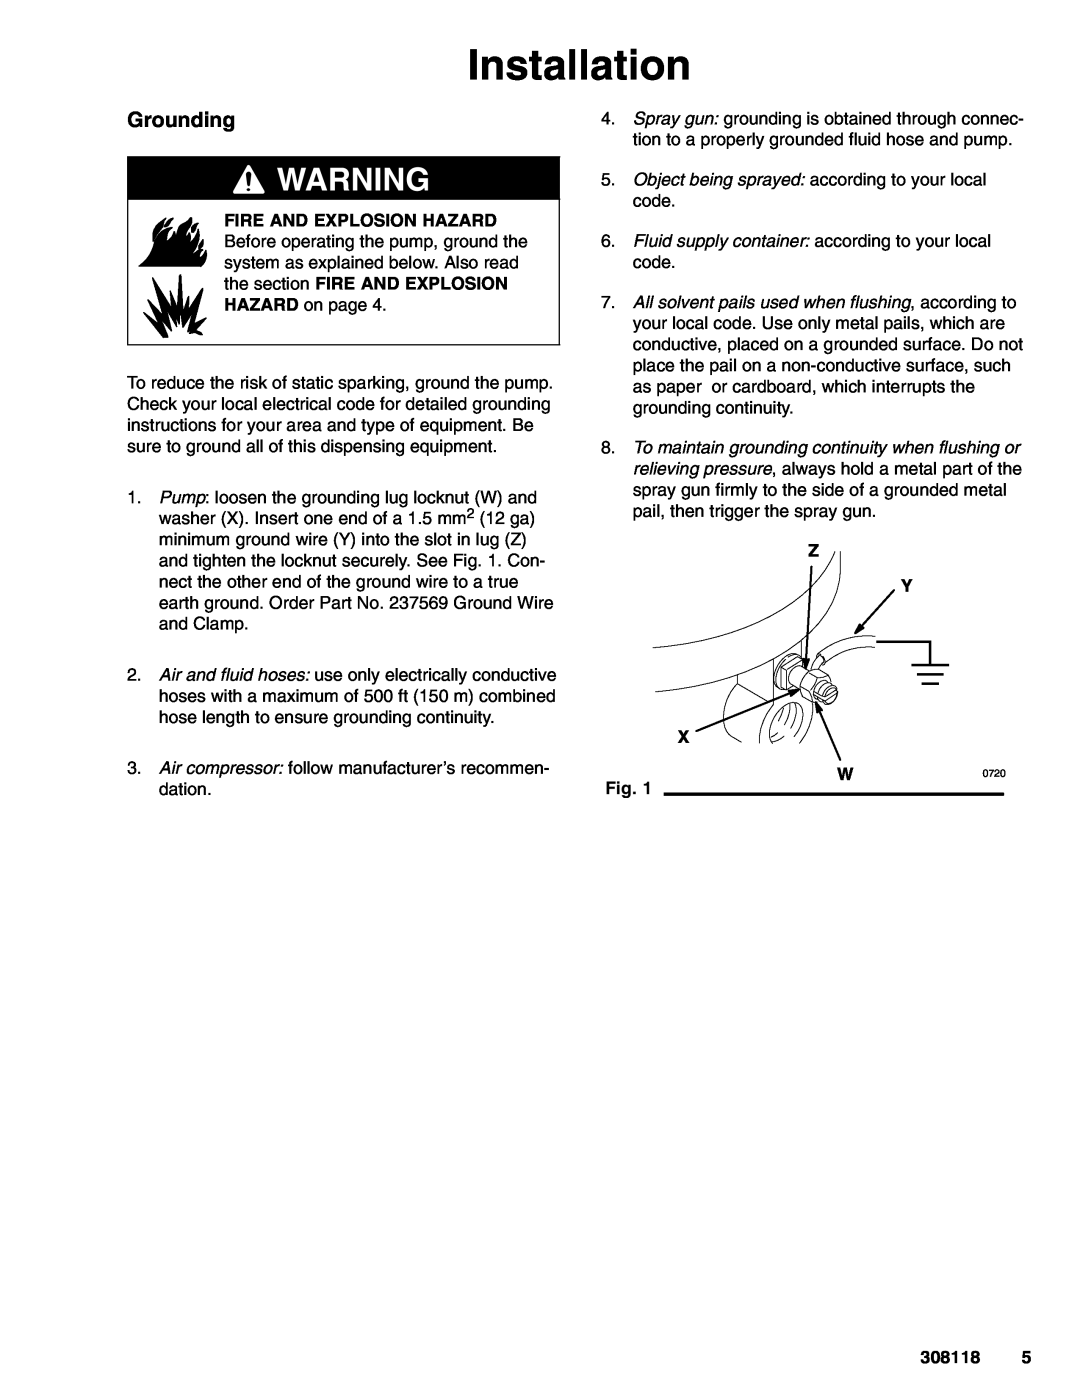 Graco 256714, 256713, 223540, 224348 important safety instructions Installation, Grounding, Z Y 